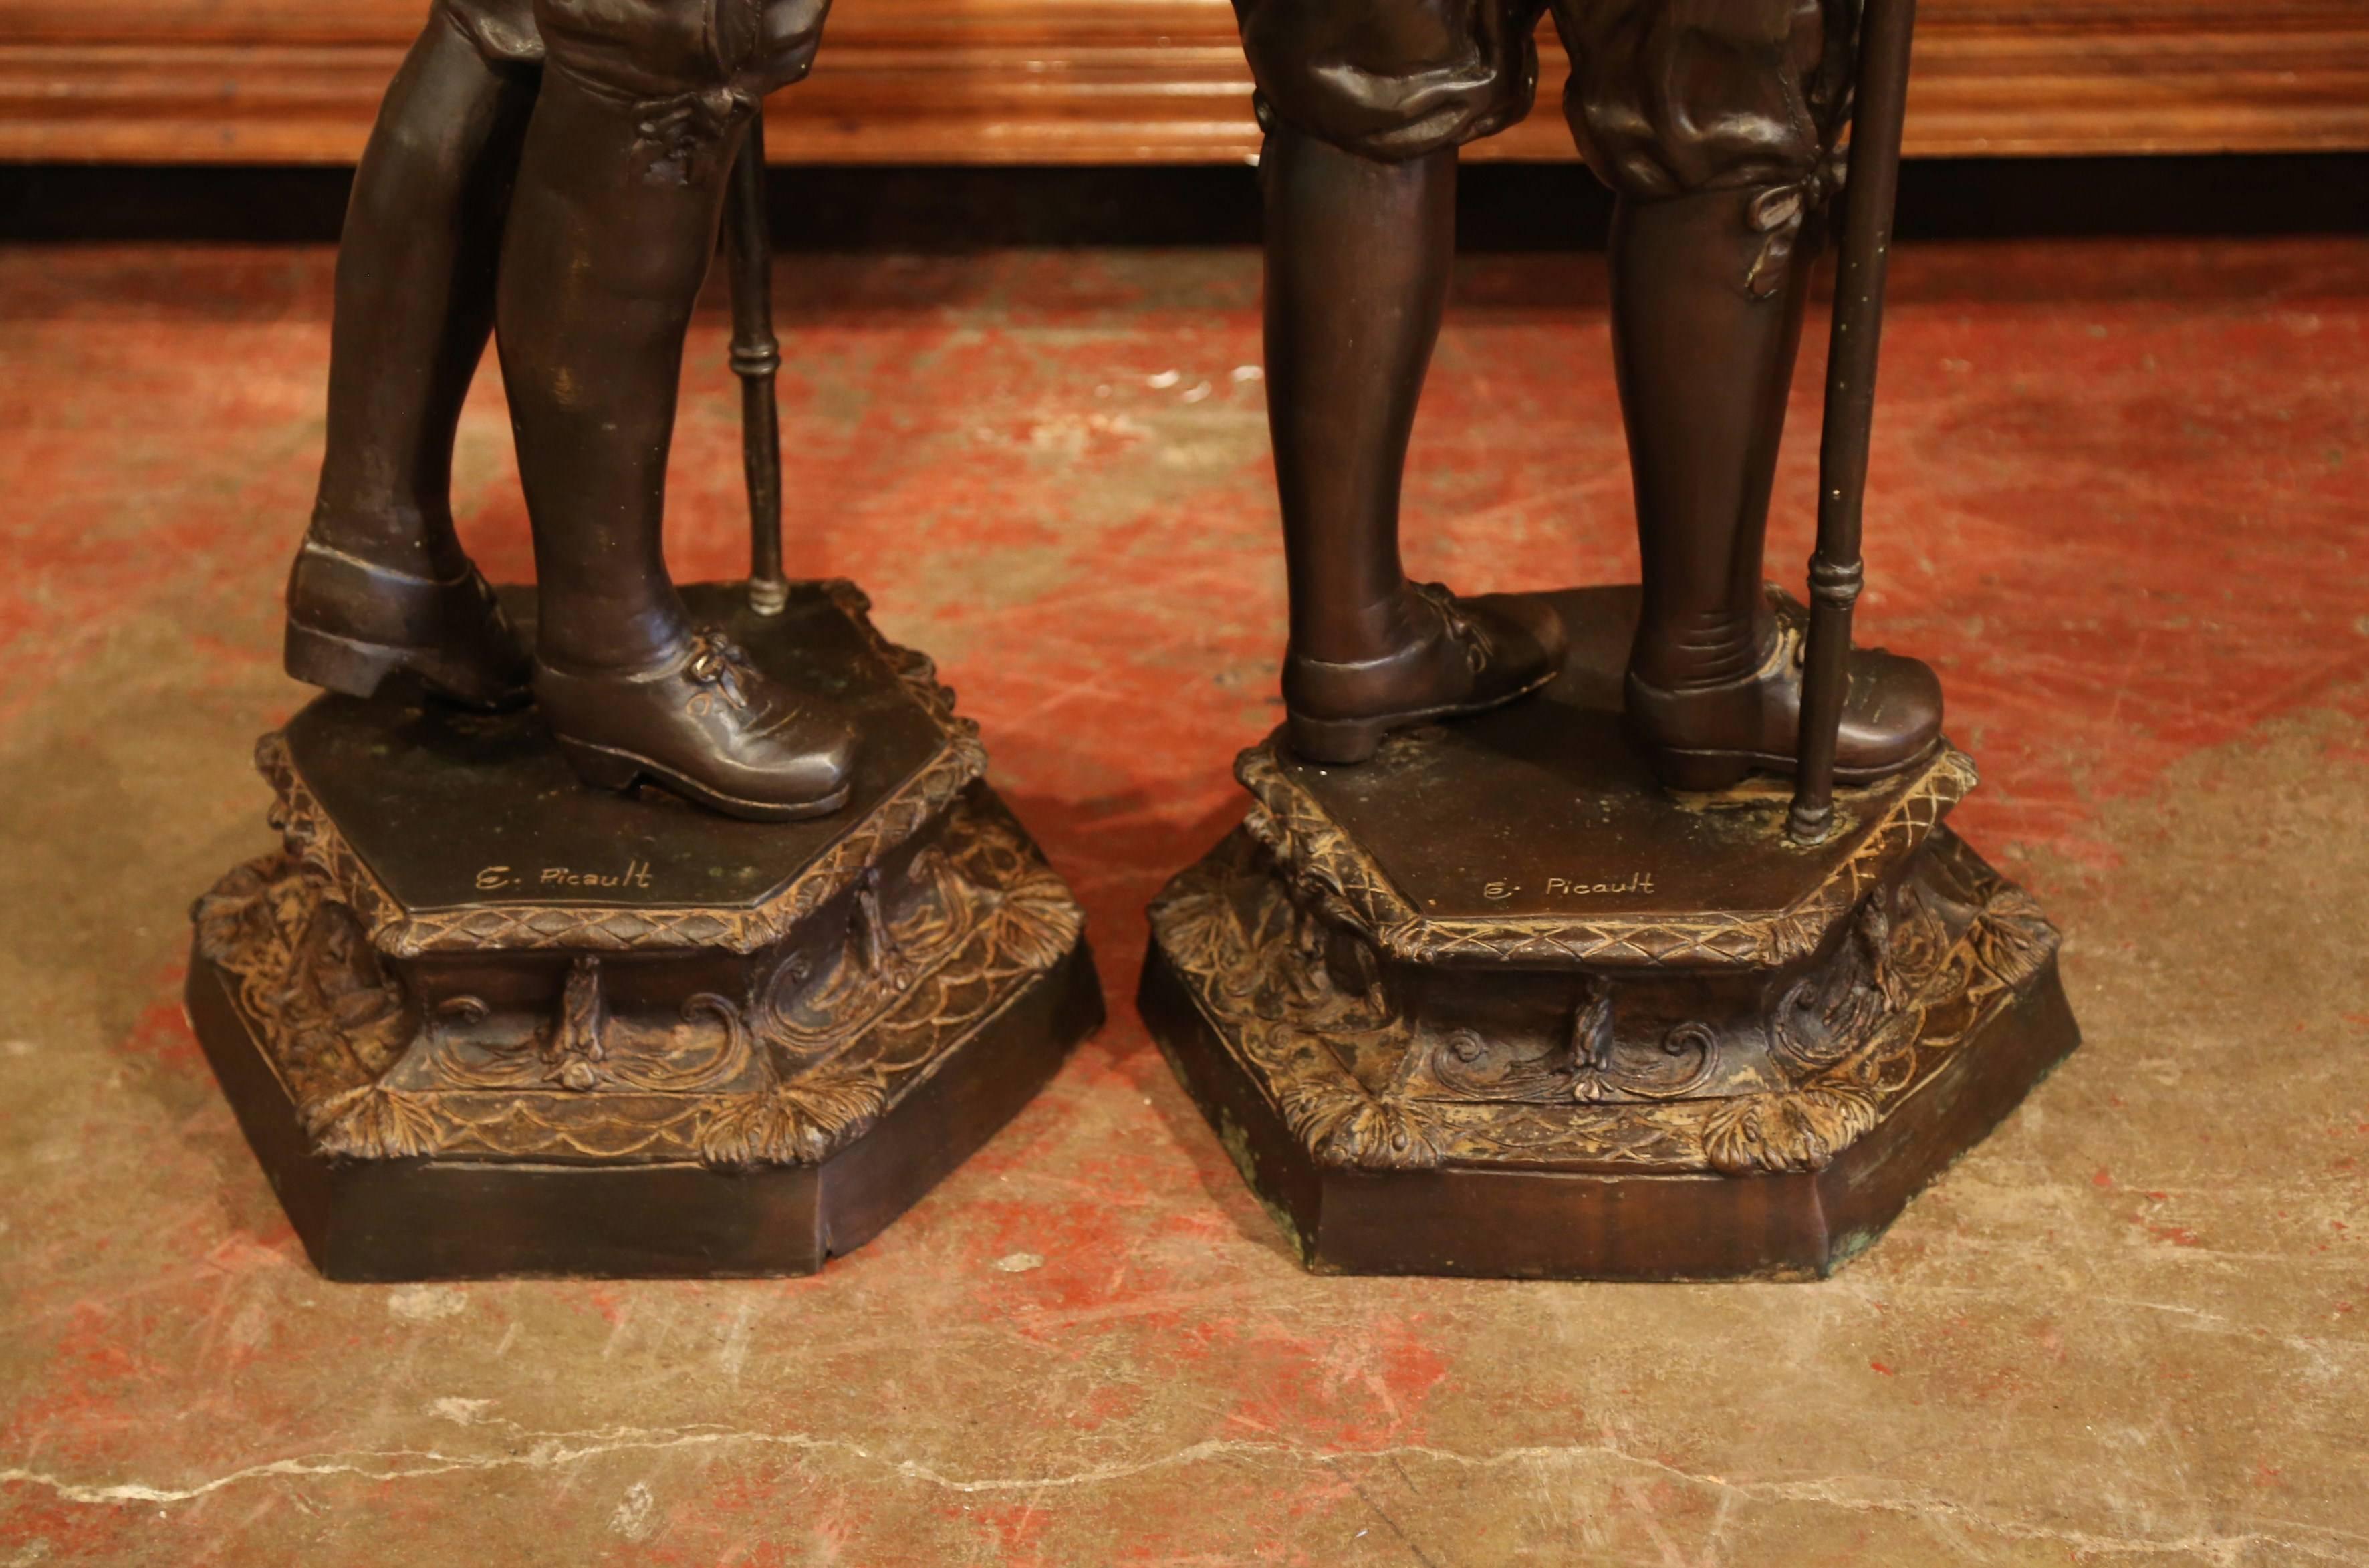 Pair of 19th Century French Patinated Musketeers Sculptures Signed E. Picault 3